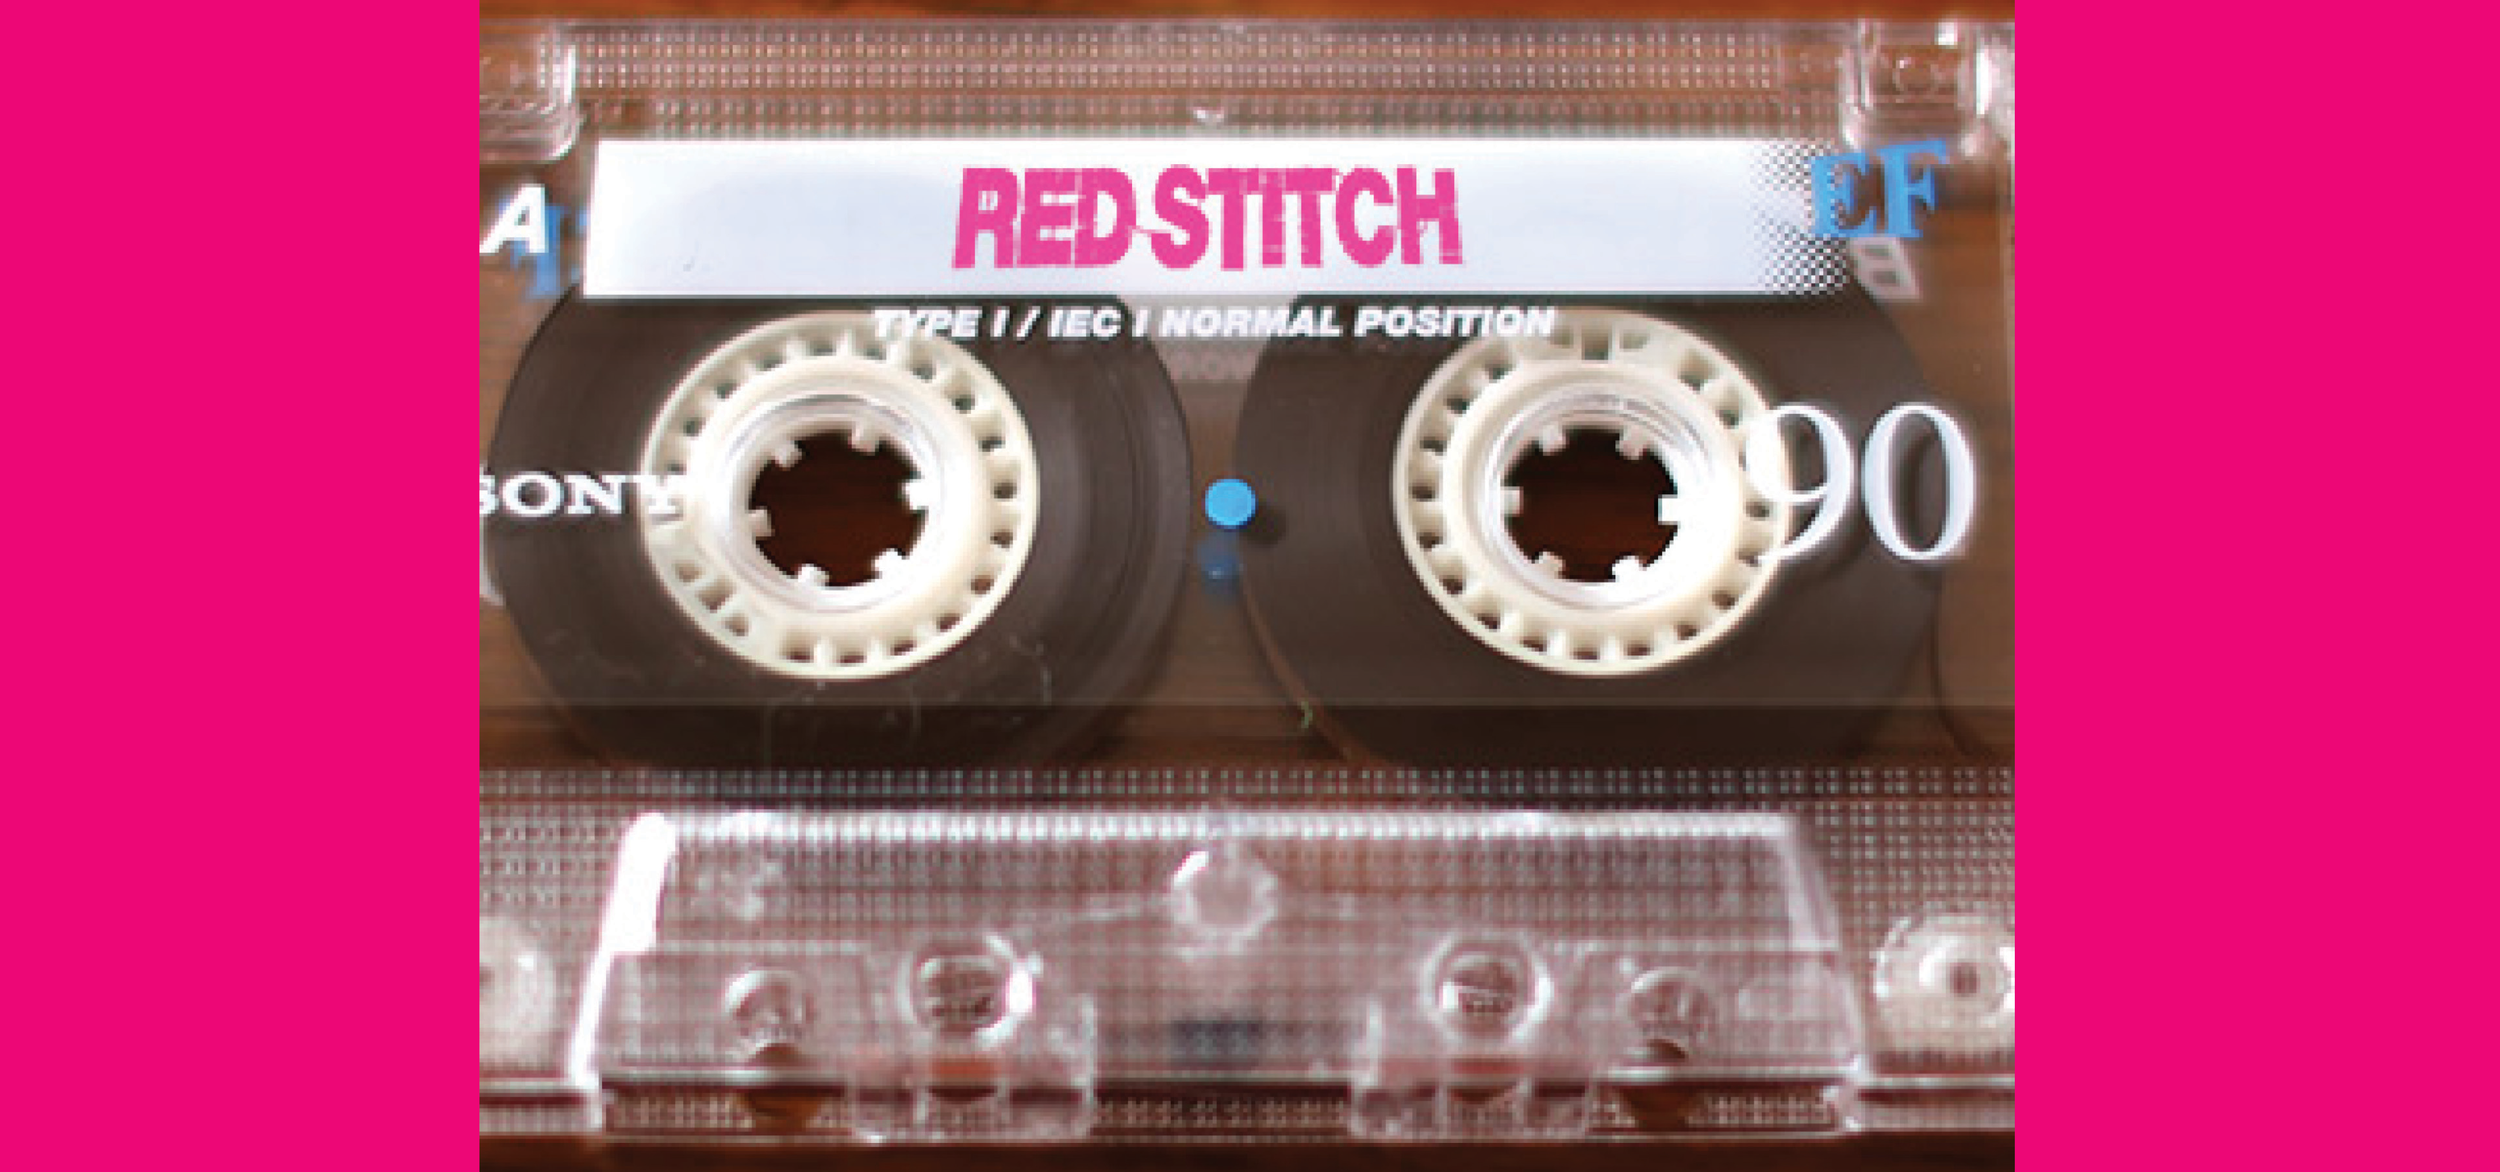 1 Red Stitch - Whats On - Melbourne Theatre - Playlist 2014.png